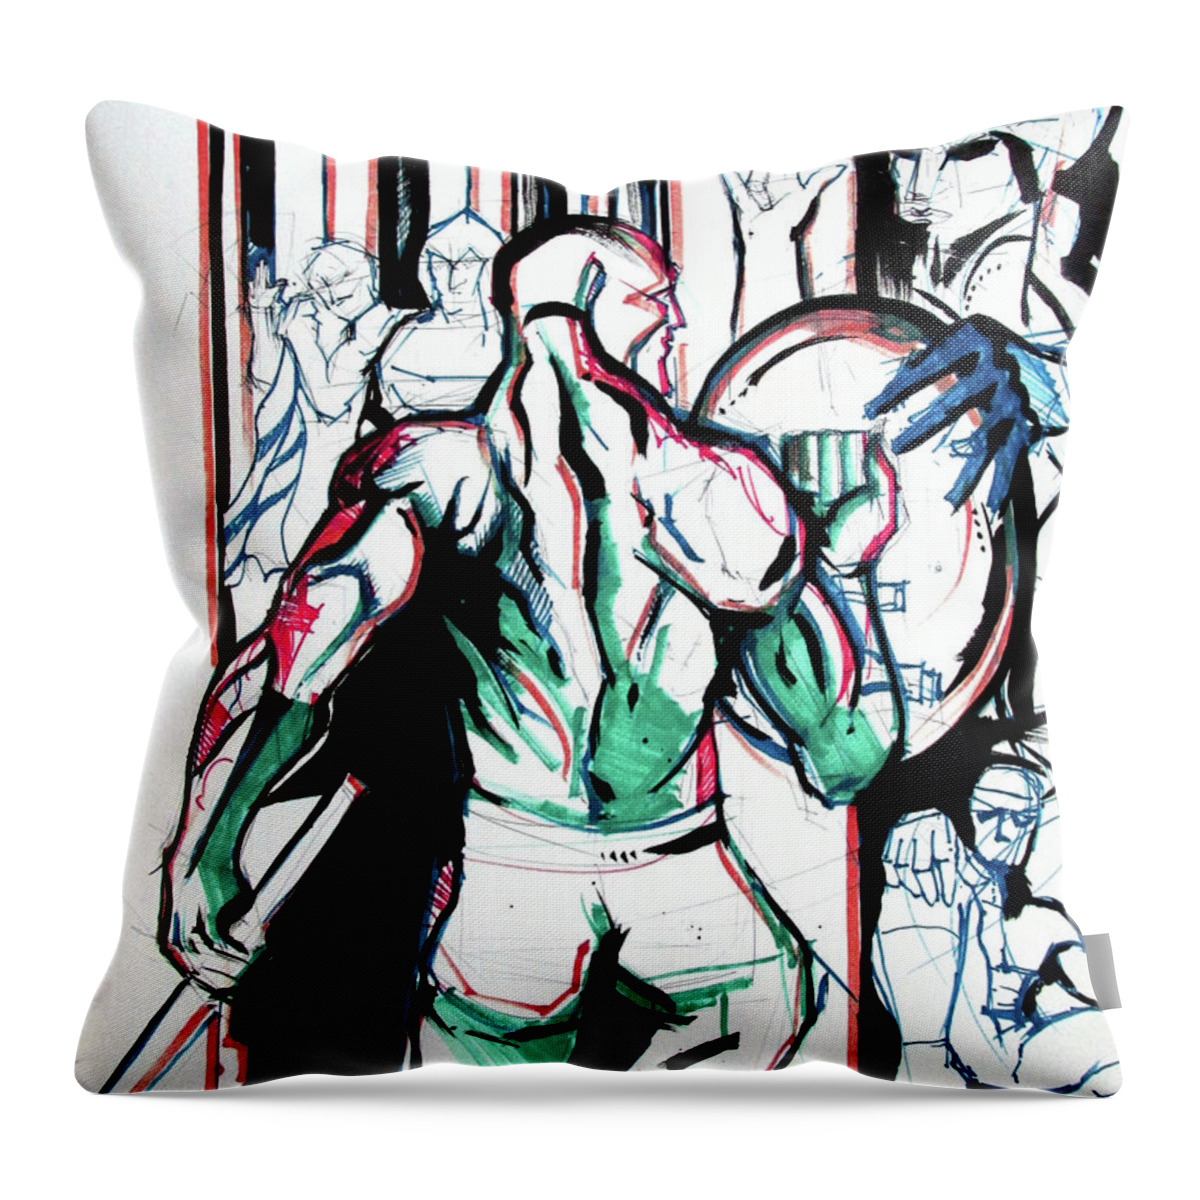 Captain America First Study Throw Pillow featuring the painting Captain America First Study by John Gholson